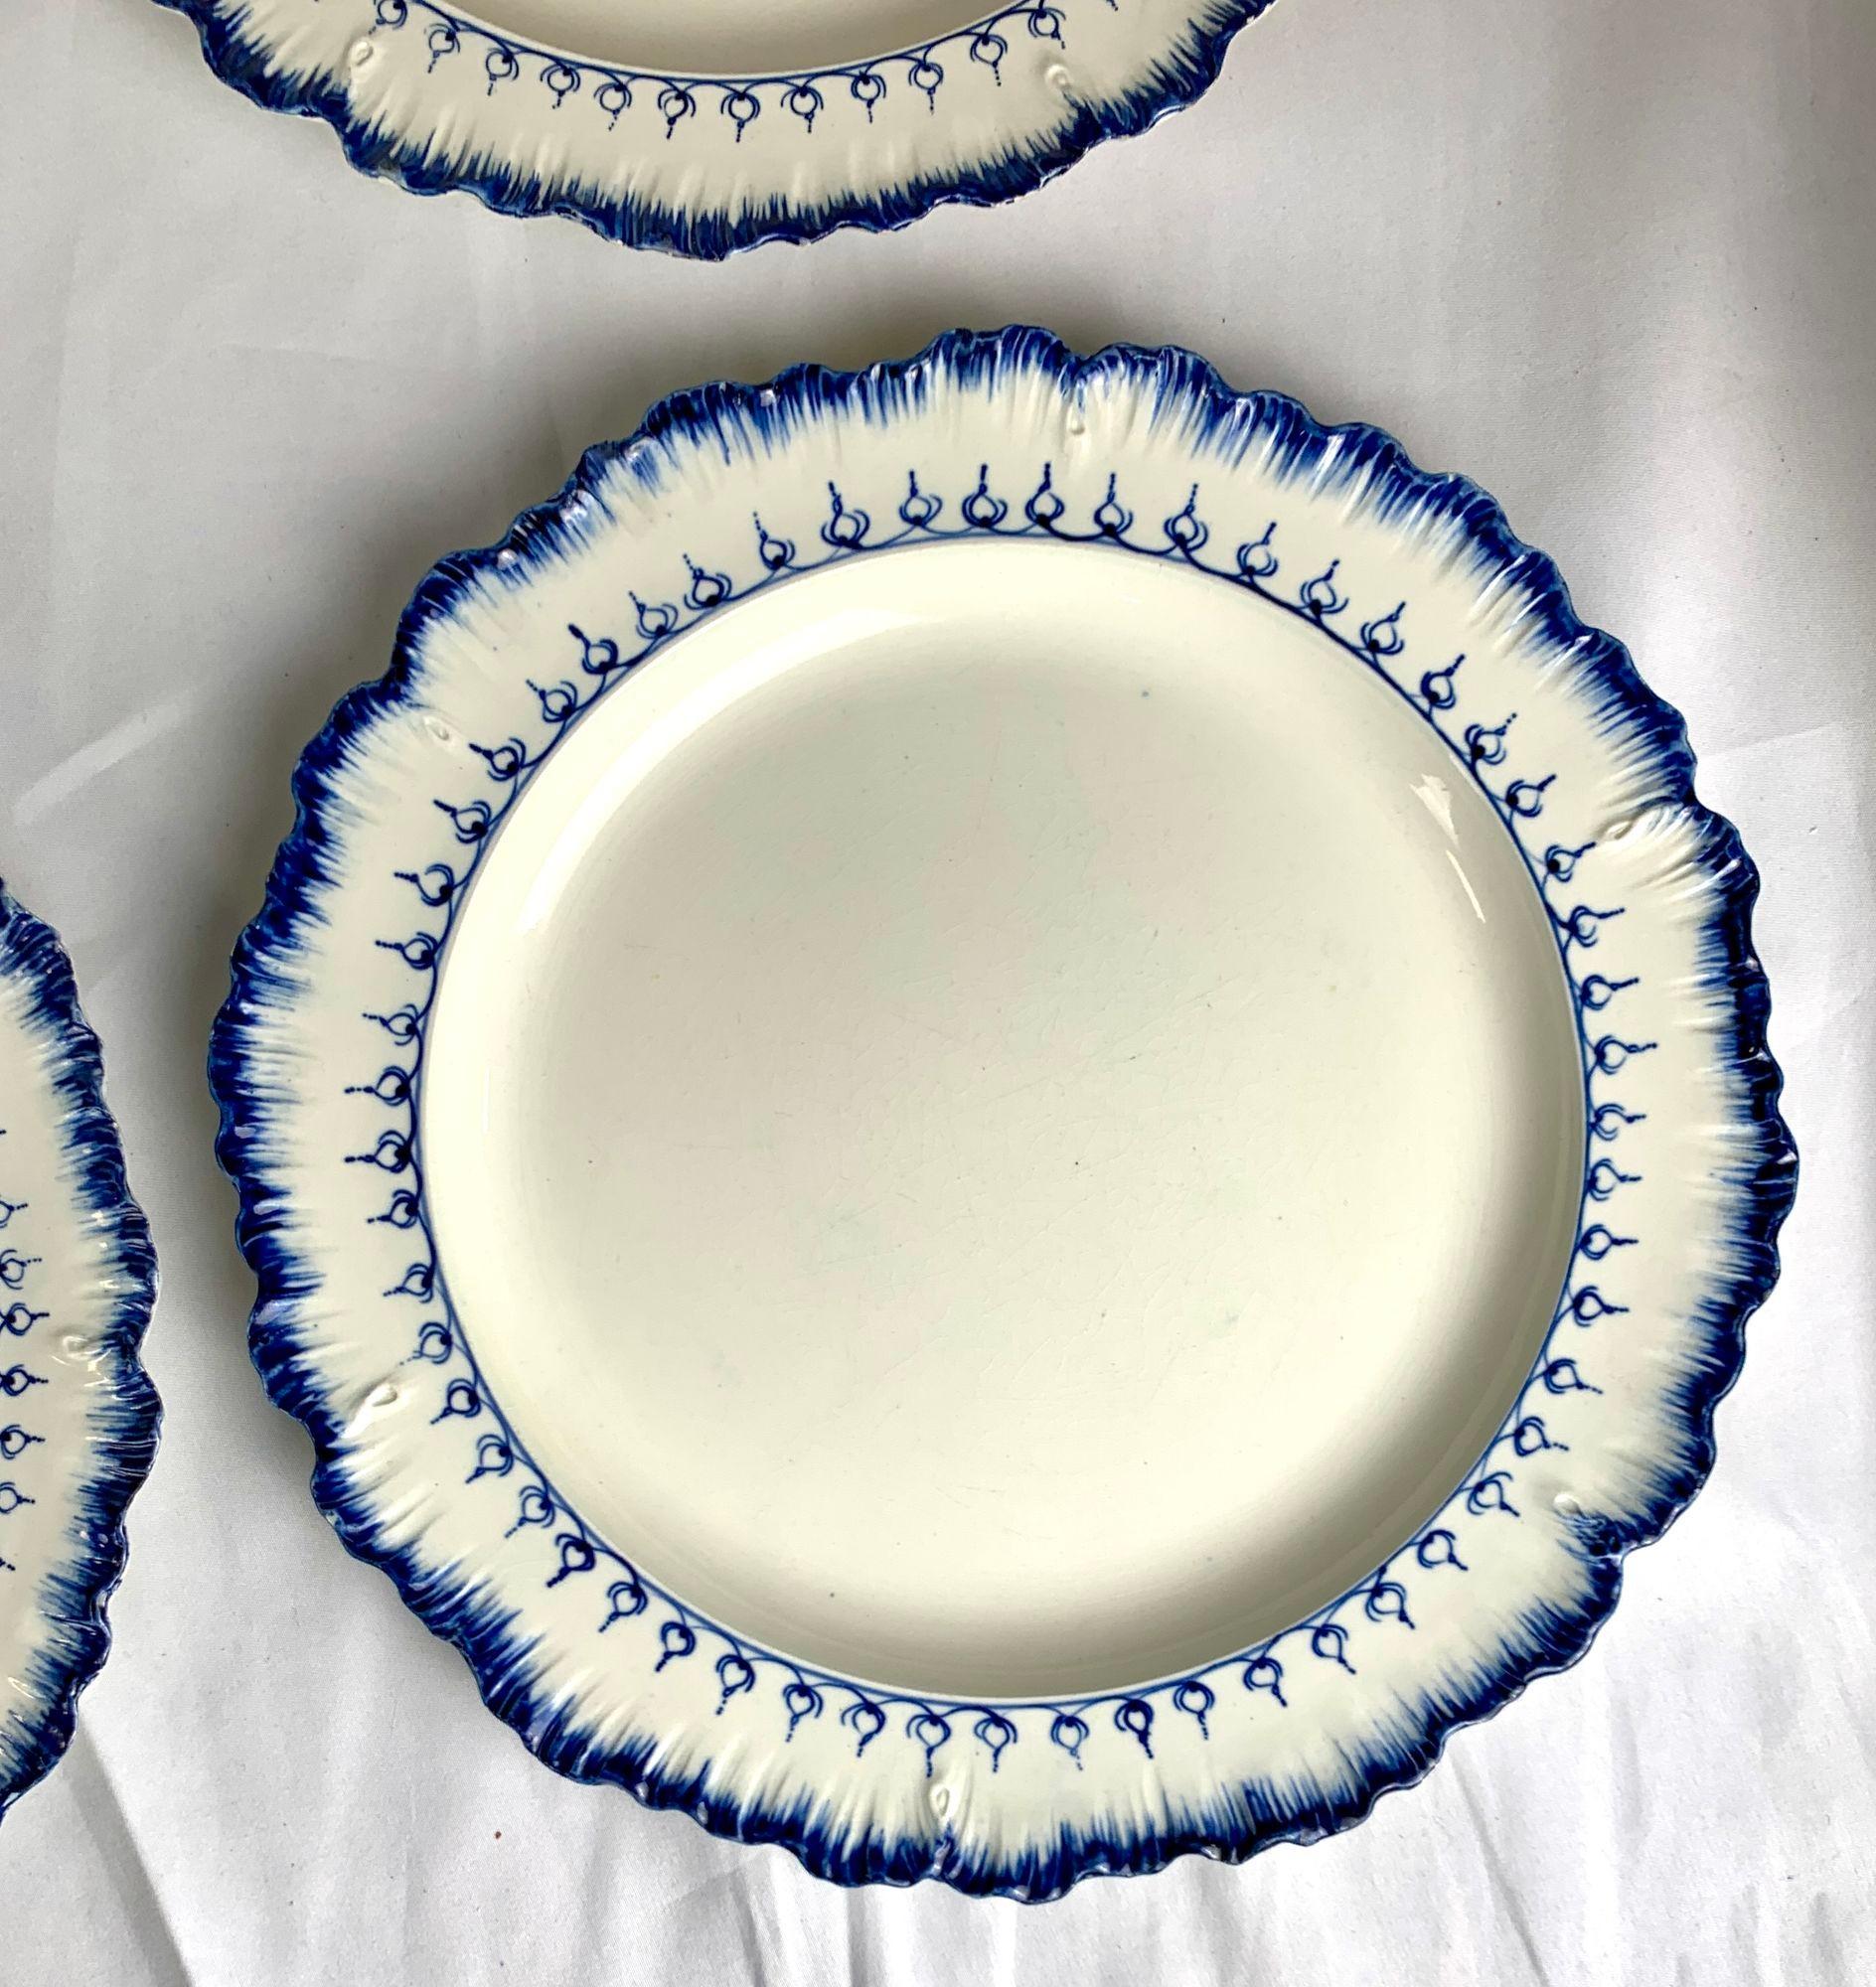 Set Eight Wedgwood Dinner Plates Mared Pattern Made England Circa 1840 In Excellent Condition For Sale In Katonah, NY